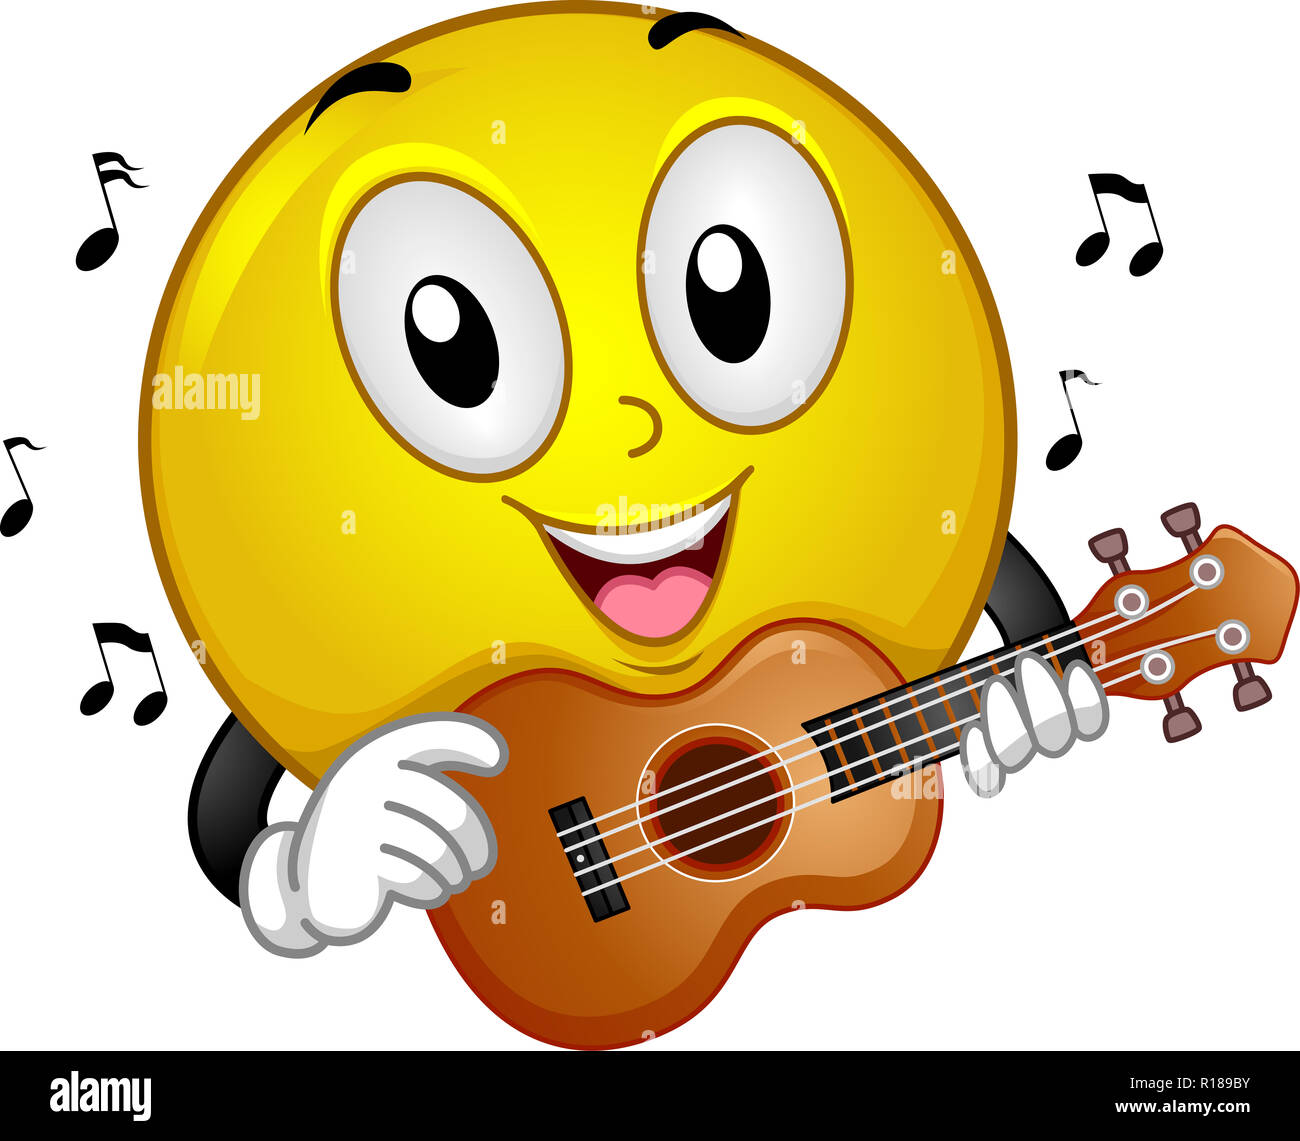 Illustration of a Smiley Mascot Playing a Ukulele with Music Notes Around  Stock Photo - Alamy